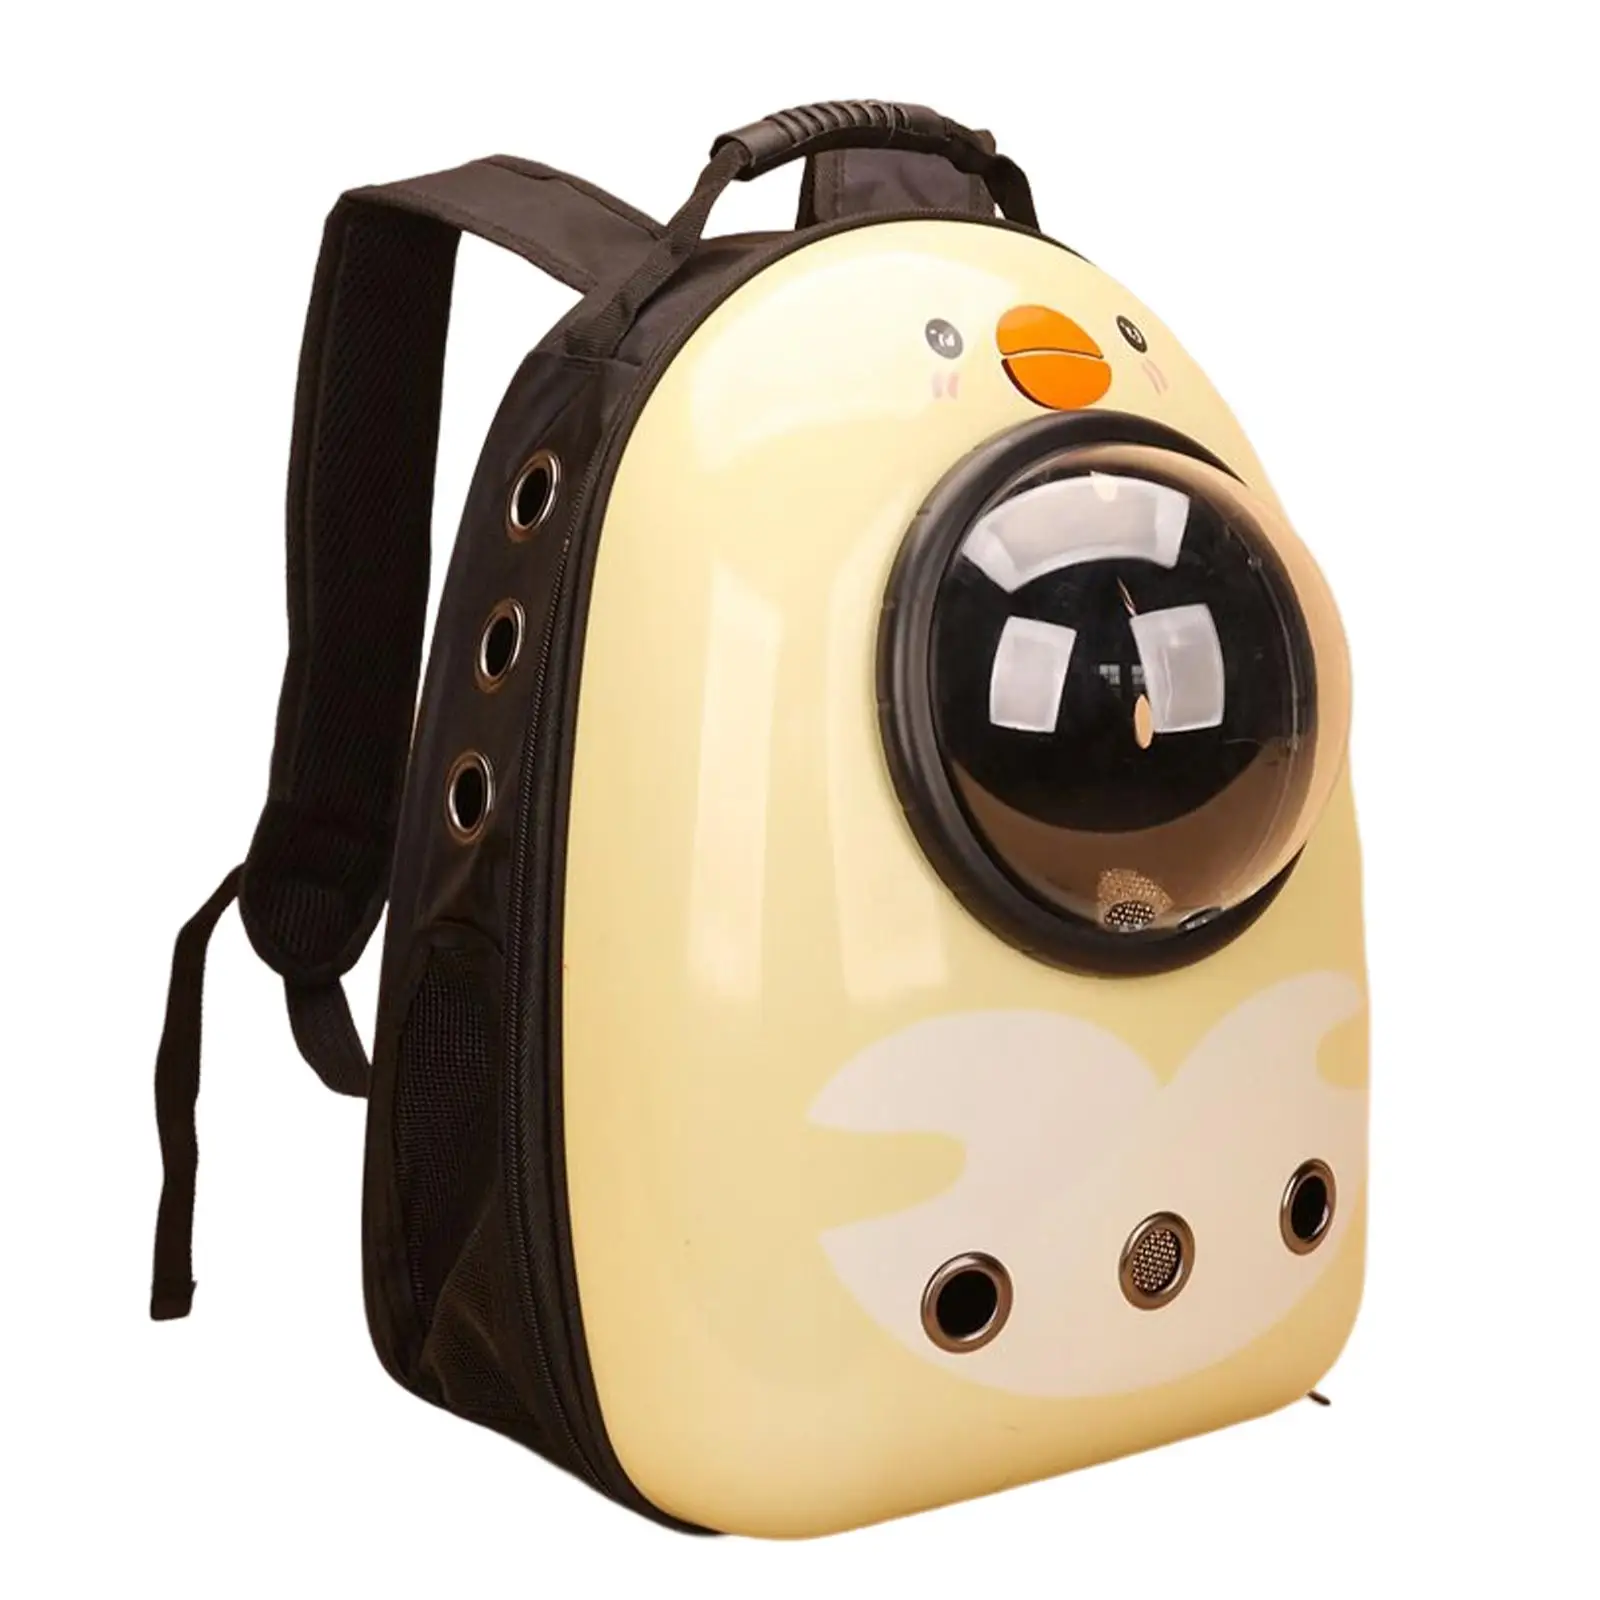 Portable Pet Cat Carrier Backpack Space Capsule Bubble Travel Bag for Hiking